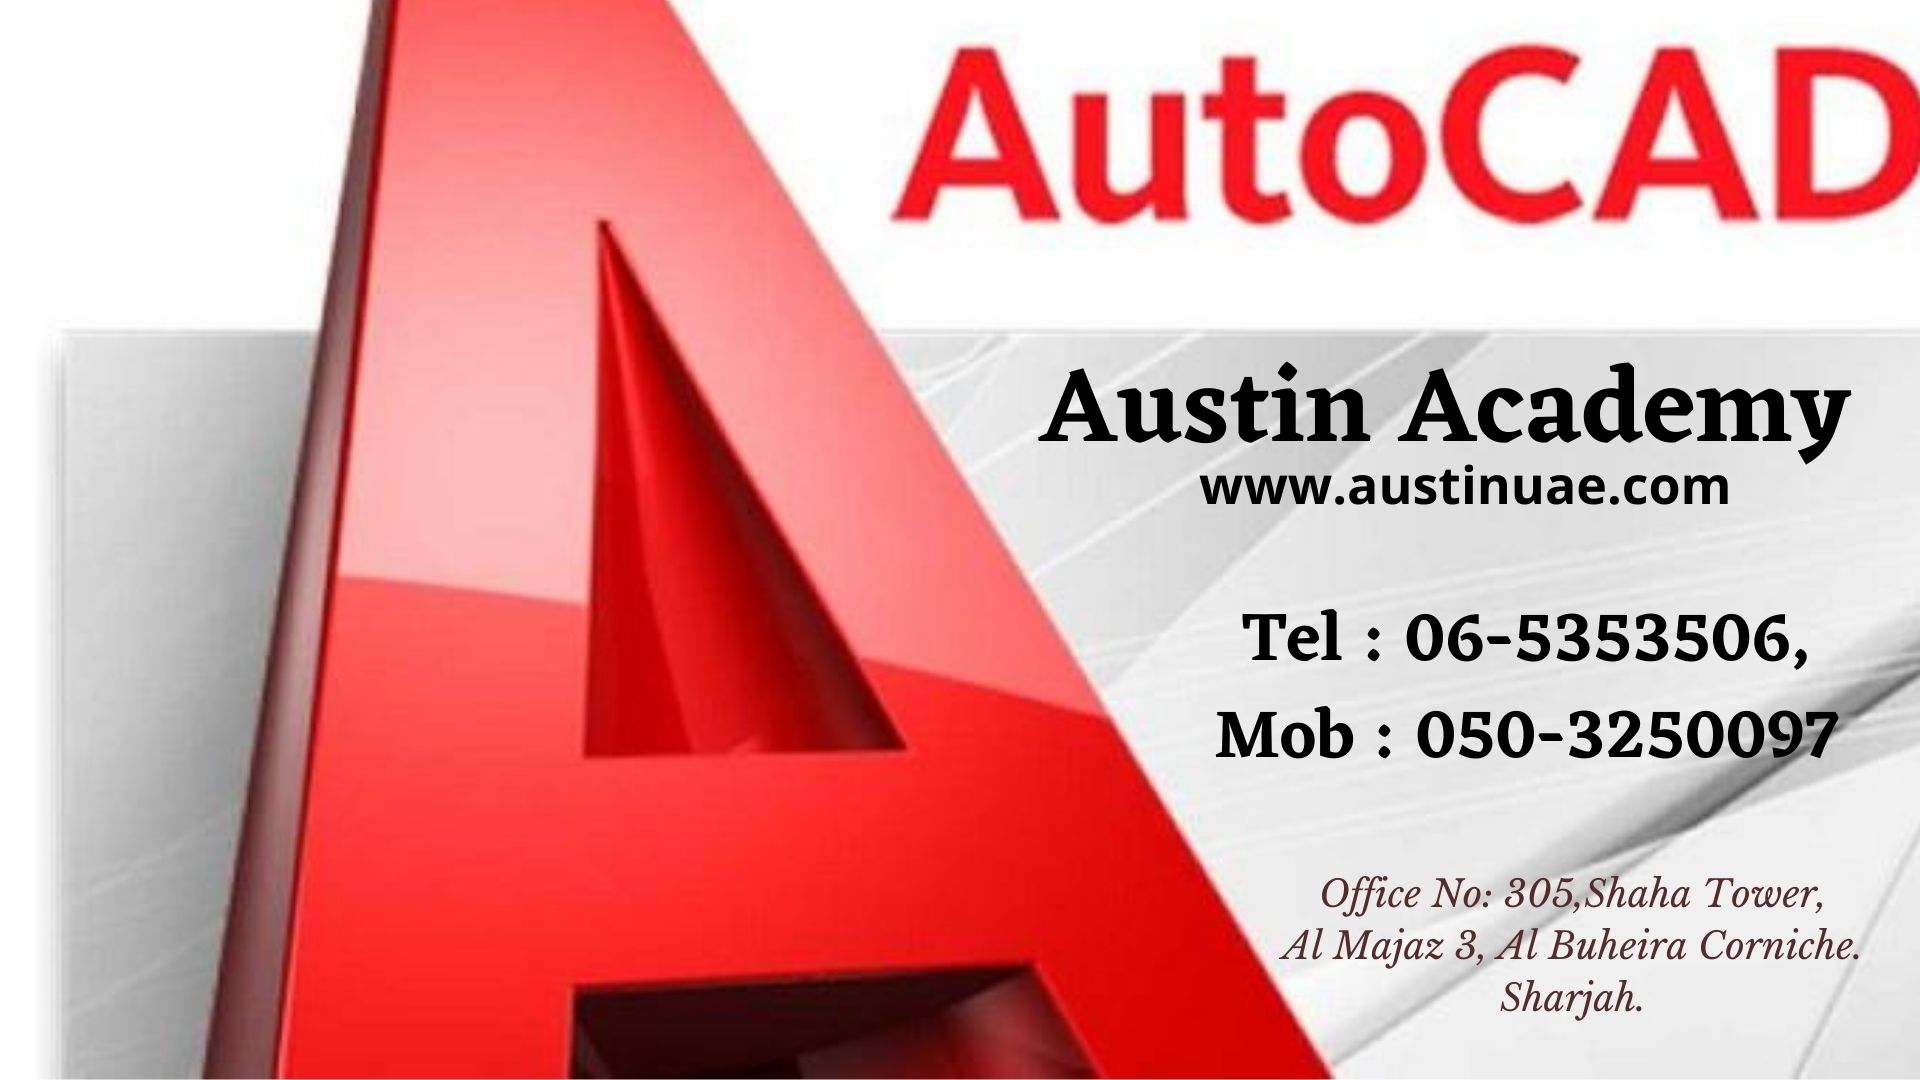 Autocad Training In Sharjah With Best Price Call 0503250097